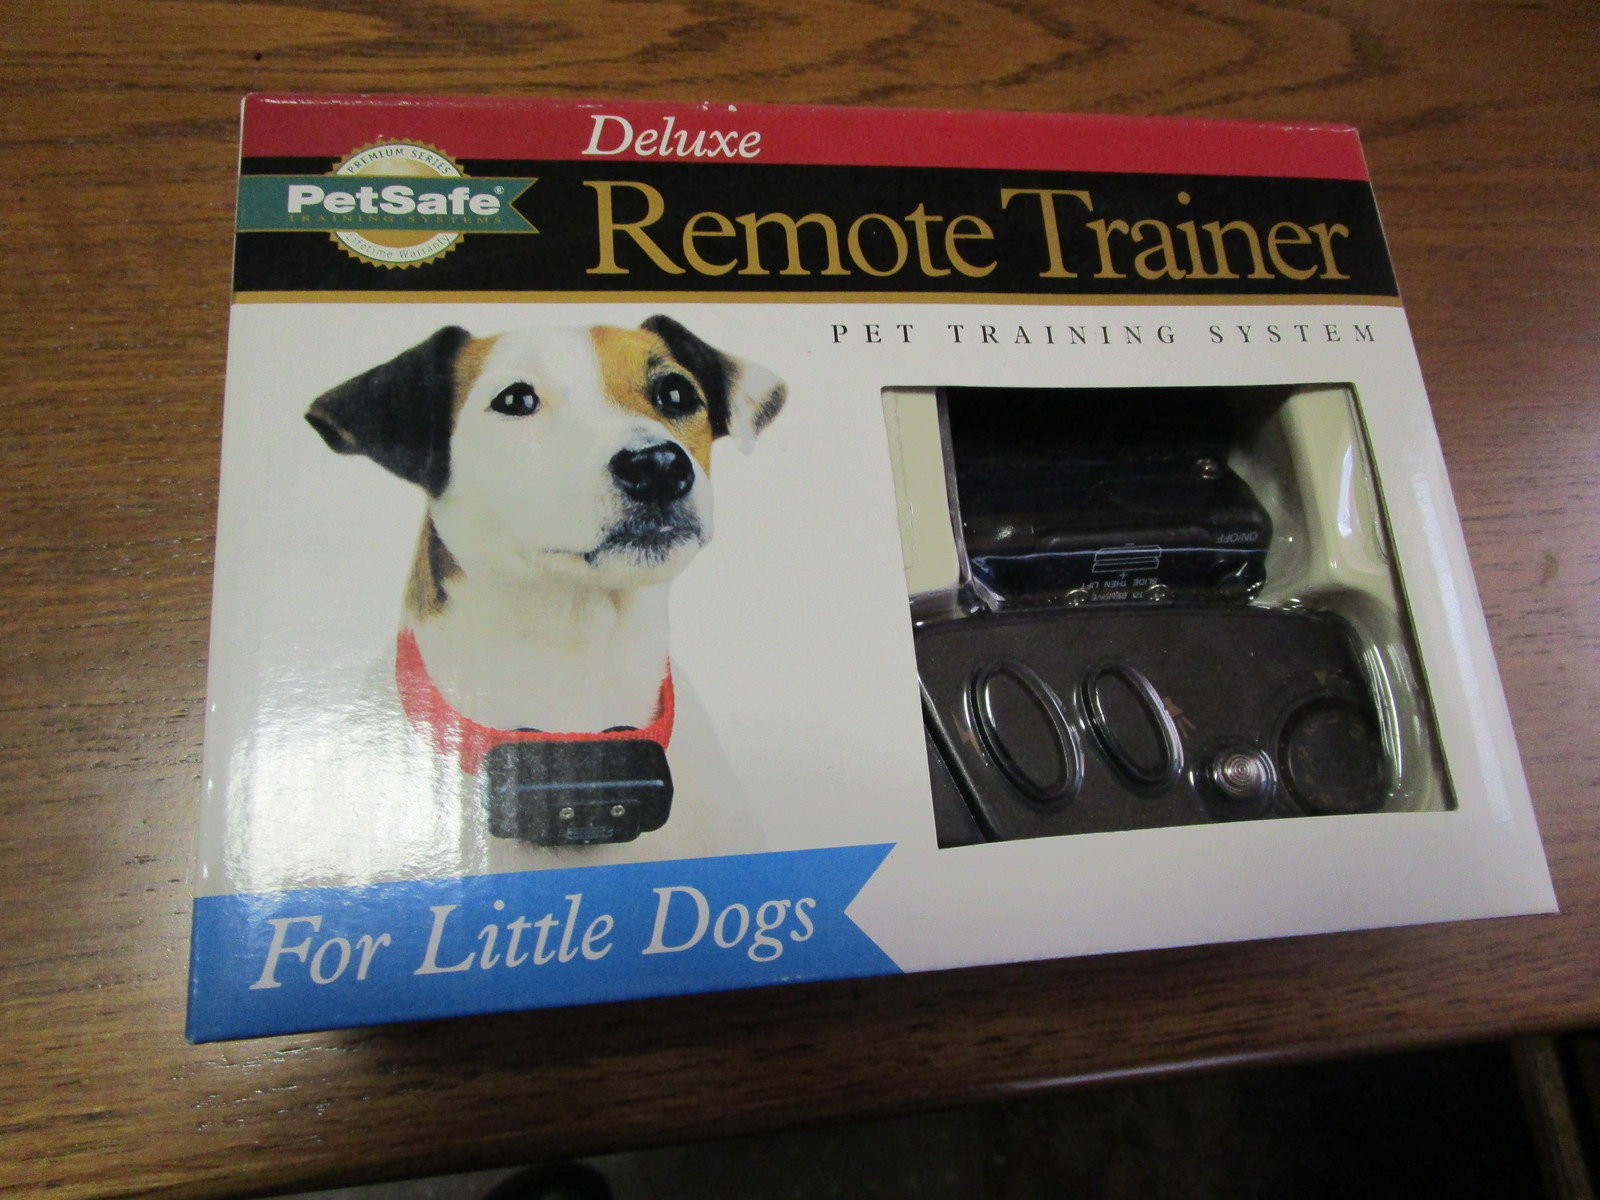 Primary image for Petsafe Deluxe Remote Trainer Pet Training System For Little Dogs